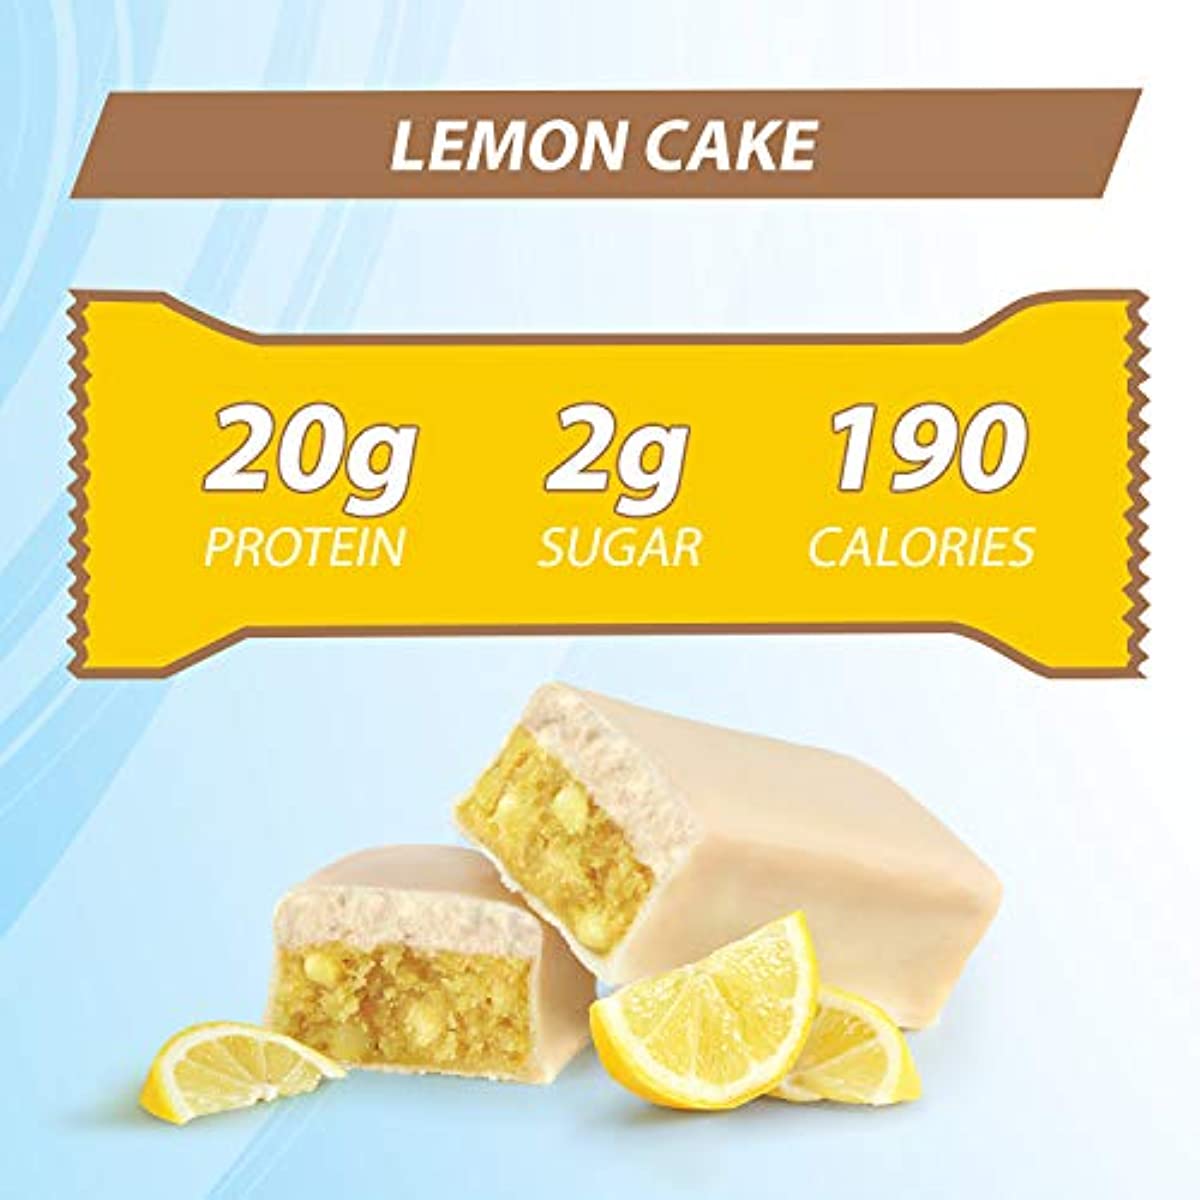 Pure Protein Bars, High Protein, Nutritious Snacks to Support Energy, Low Sugar, Lemon Cake, 1.76 oz, 12 Count